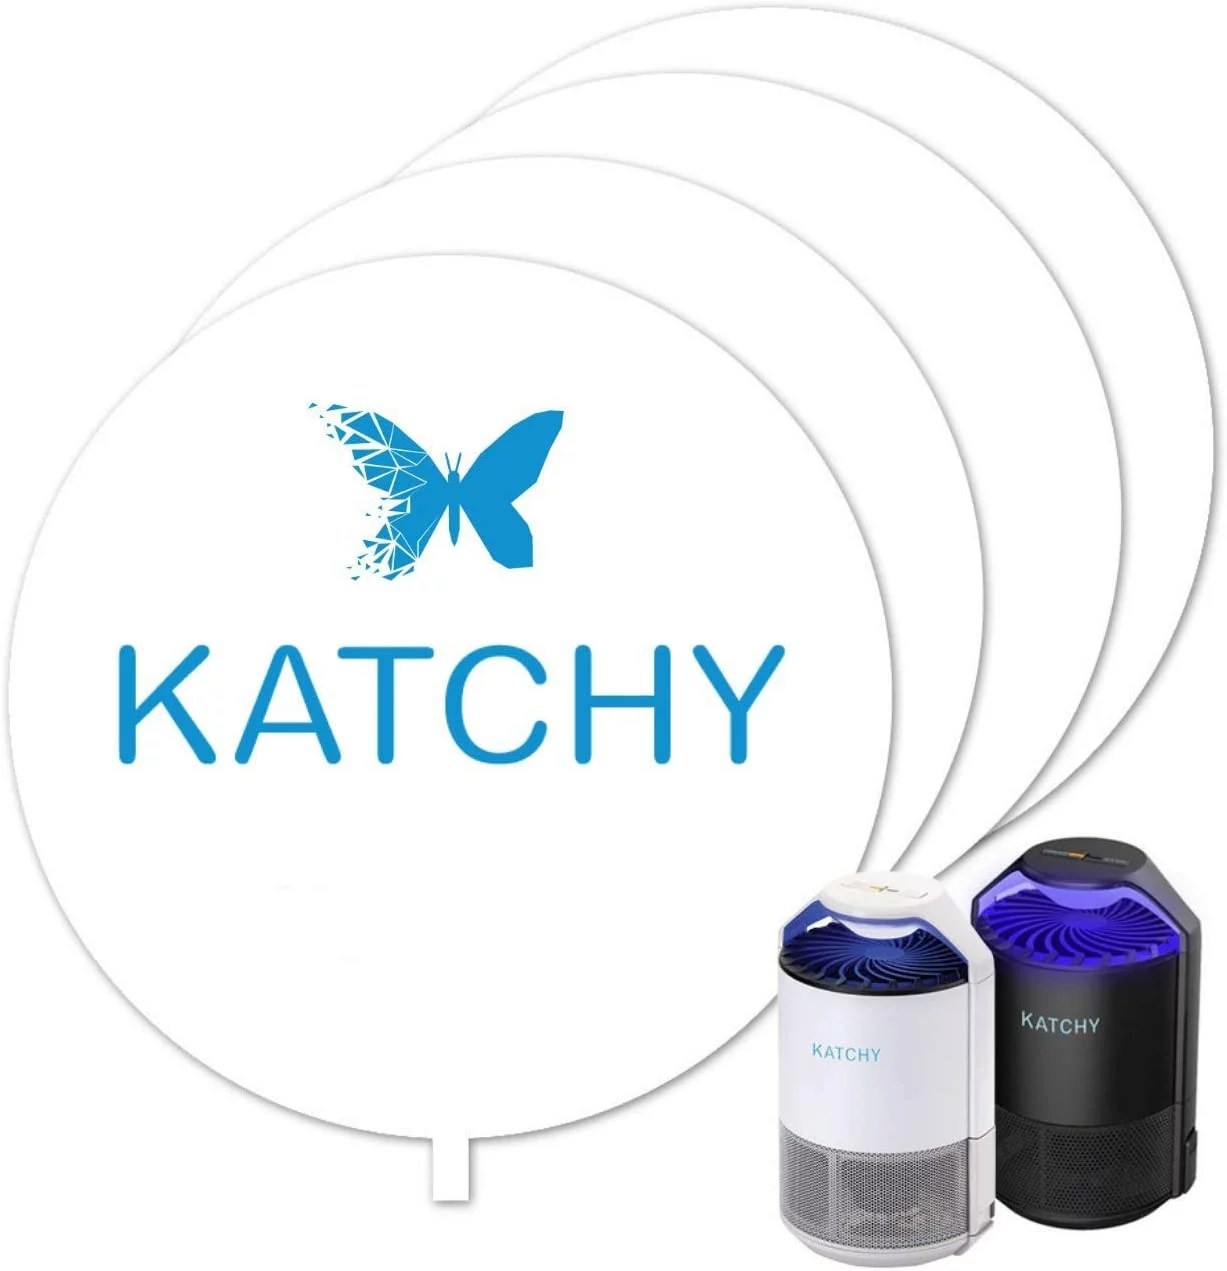 How to get rid of fungus gnats and fruit flies: The Katchy bug trap